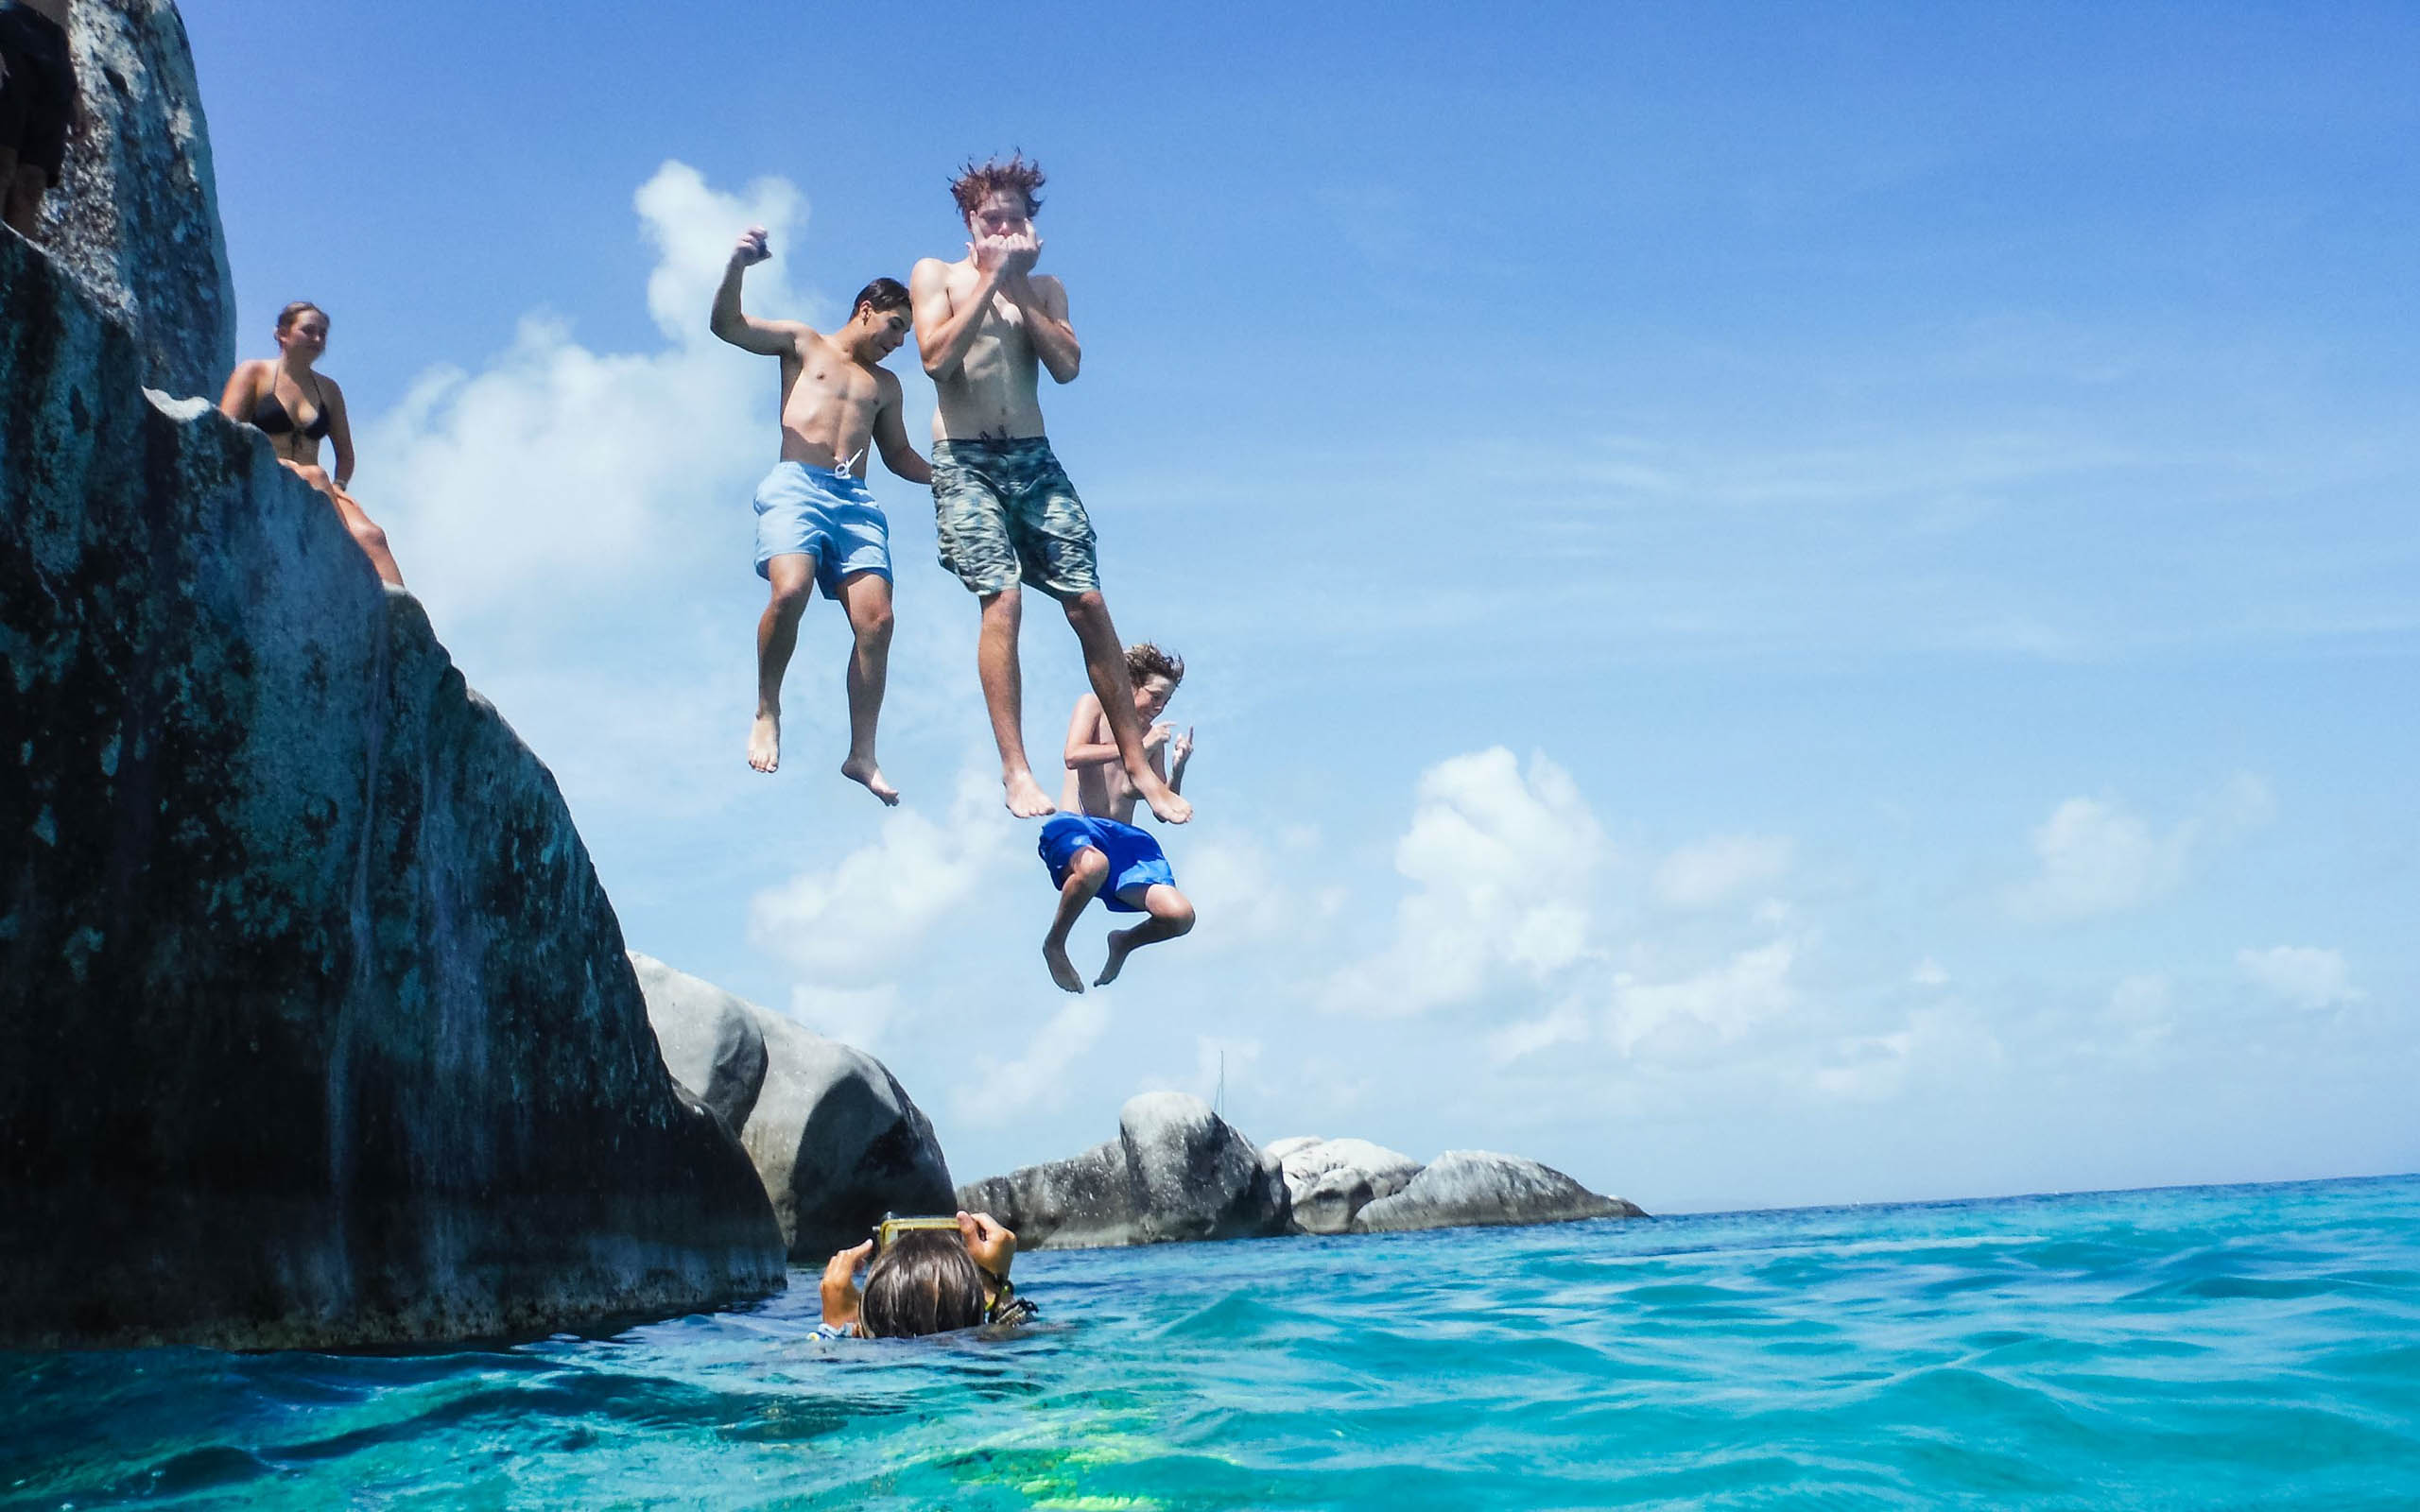 A group of people jumping off a cliff into the ocean.